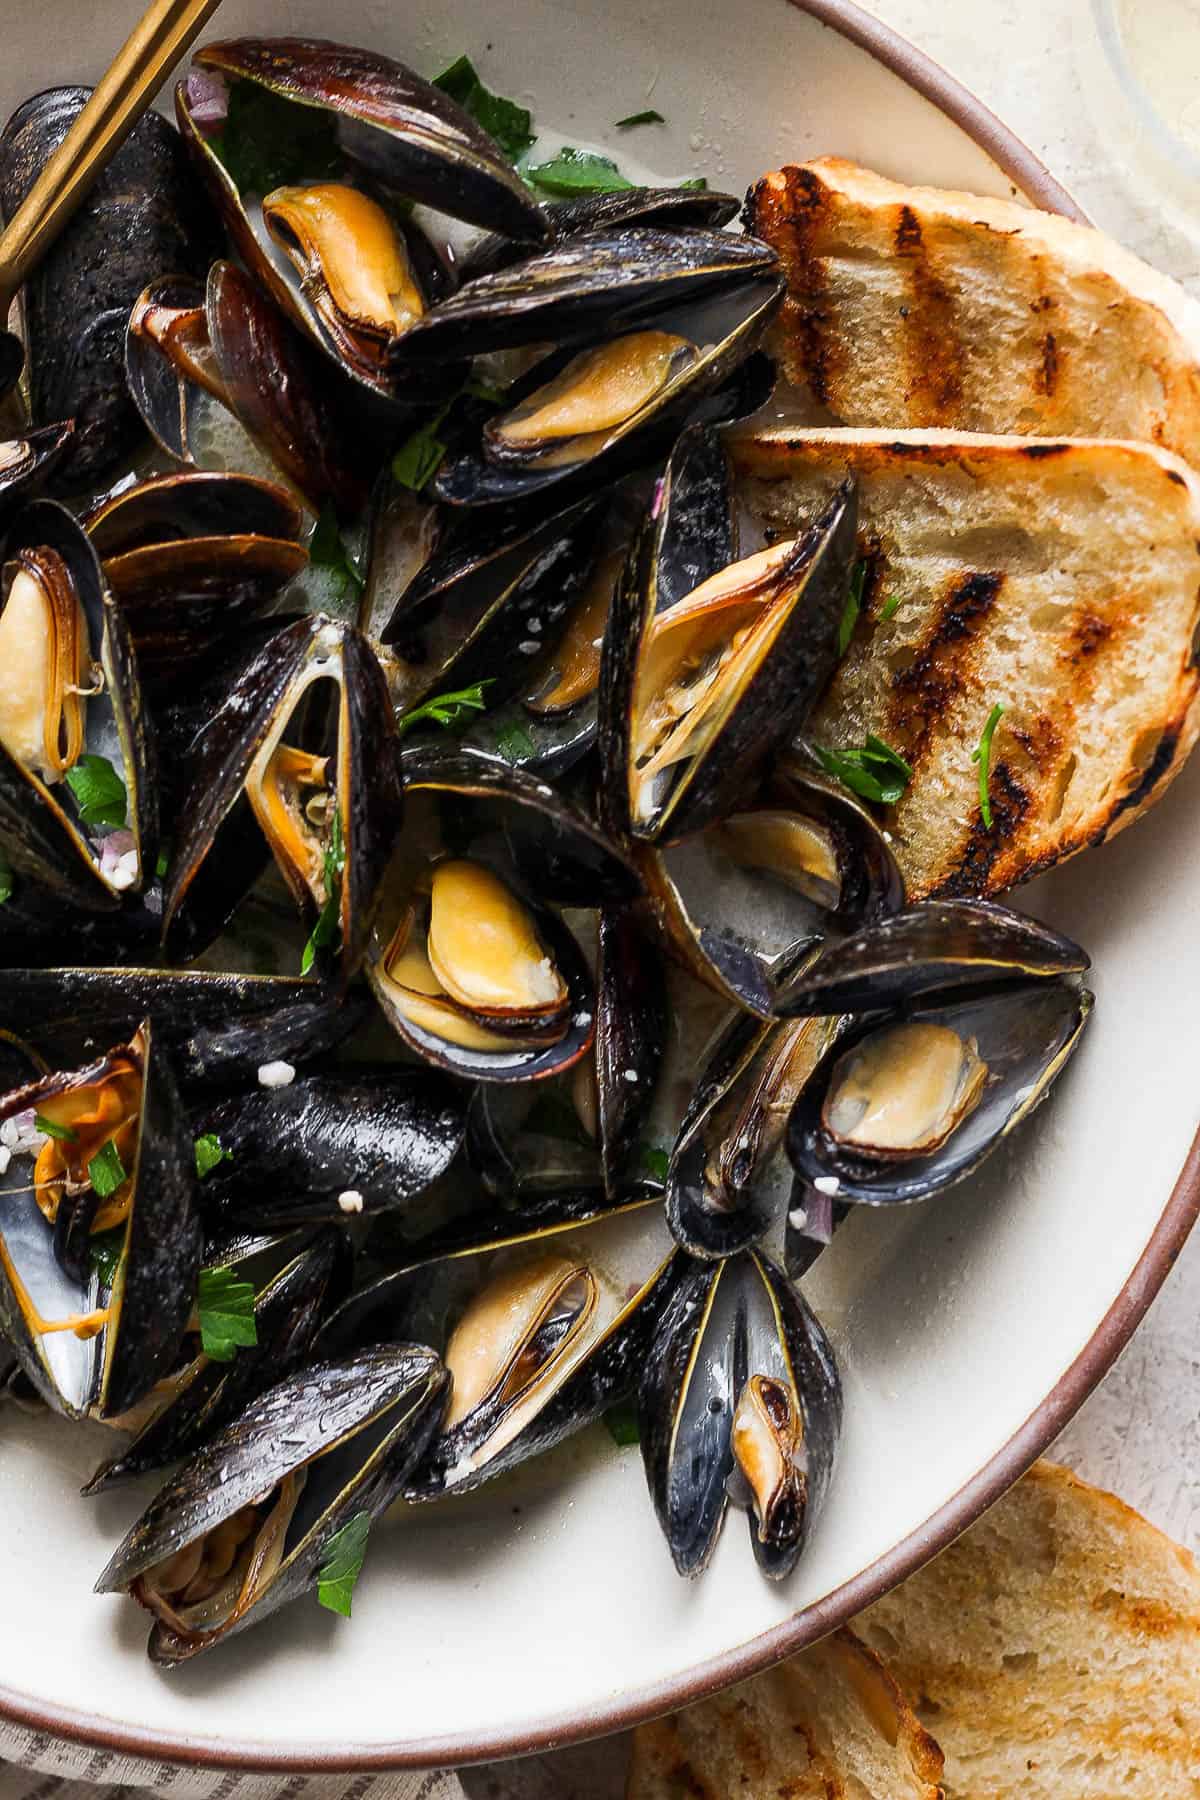 Bowl of mussels with grilled bread.